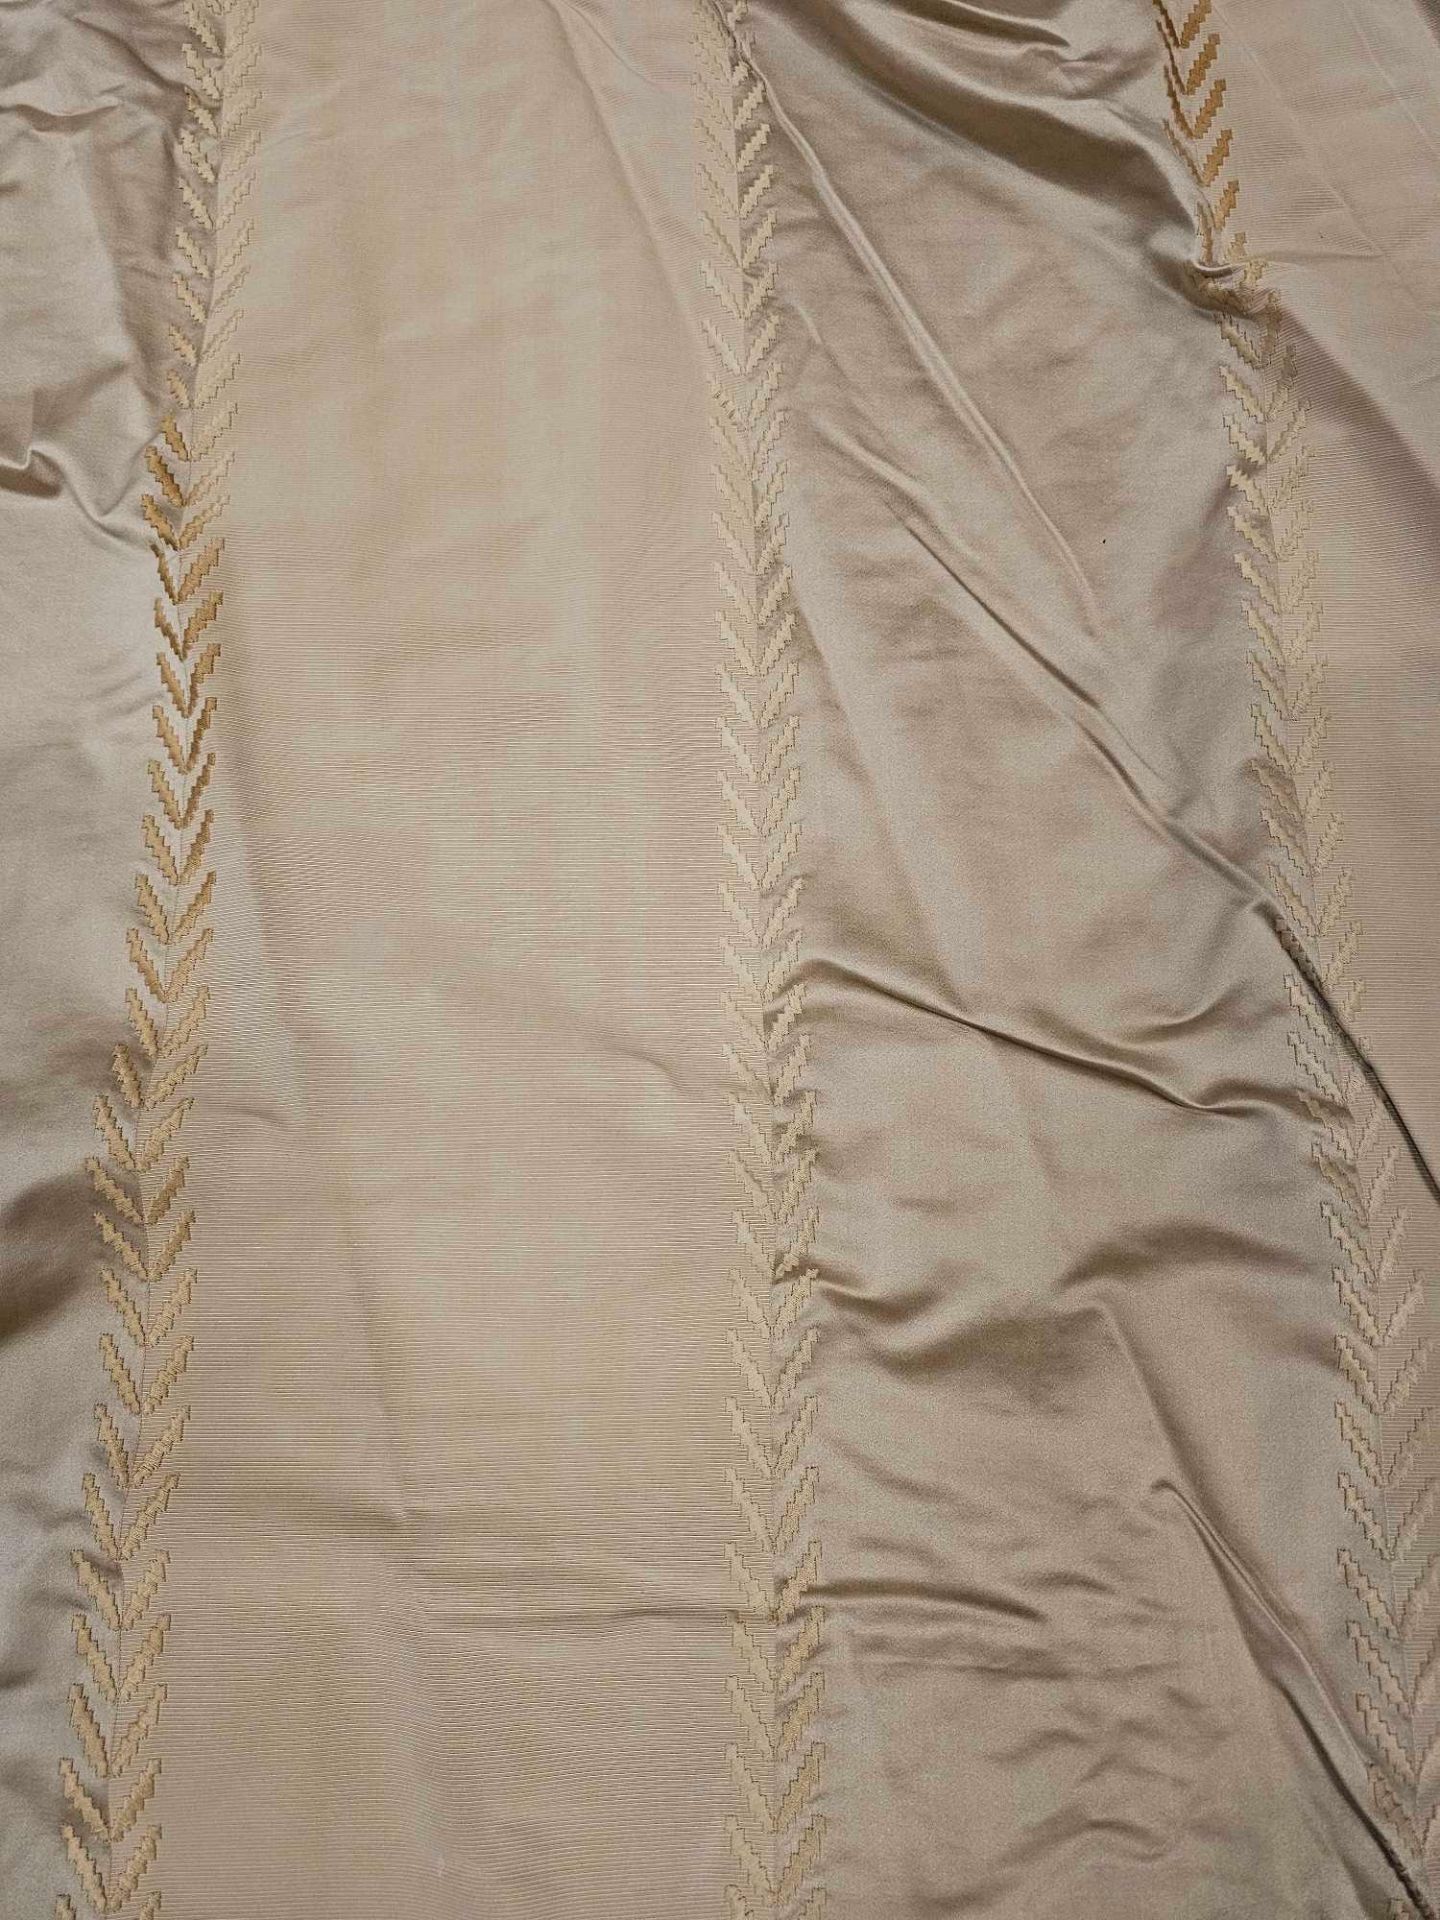 Single Cream And Silver Silk Drapes Brown Piping Arrow Pattern Size -cm 95 x 262 Ref Dorch 80 Single - Image 5 of 5